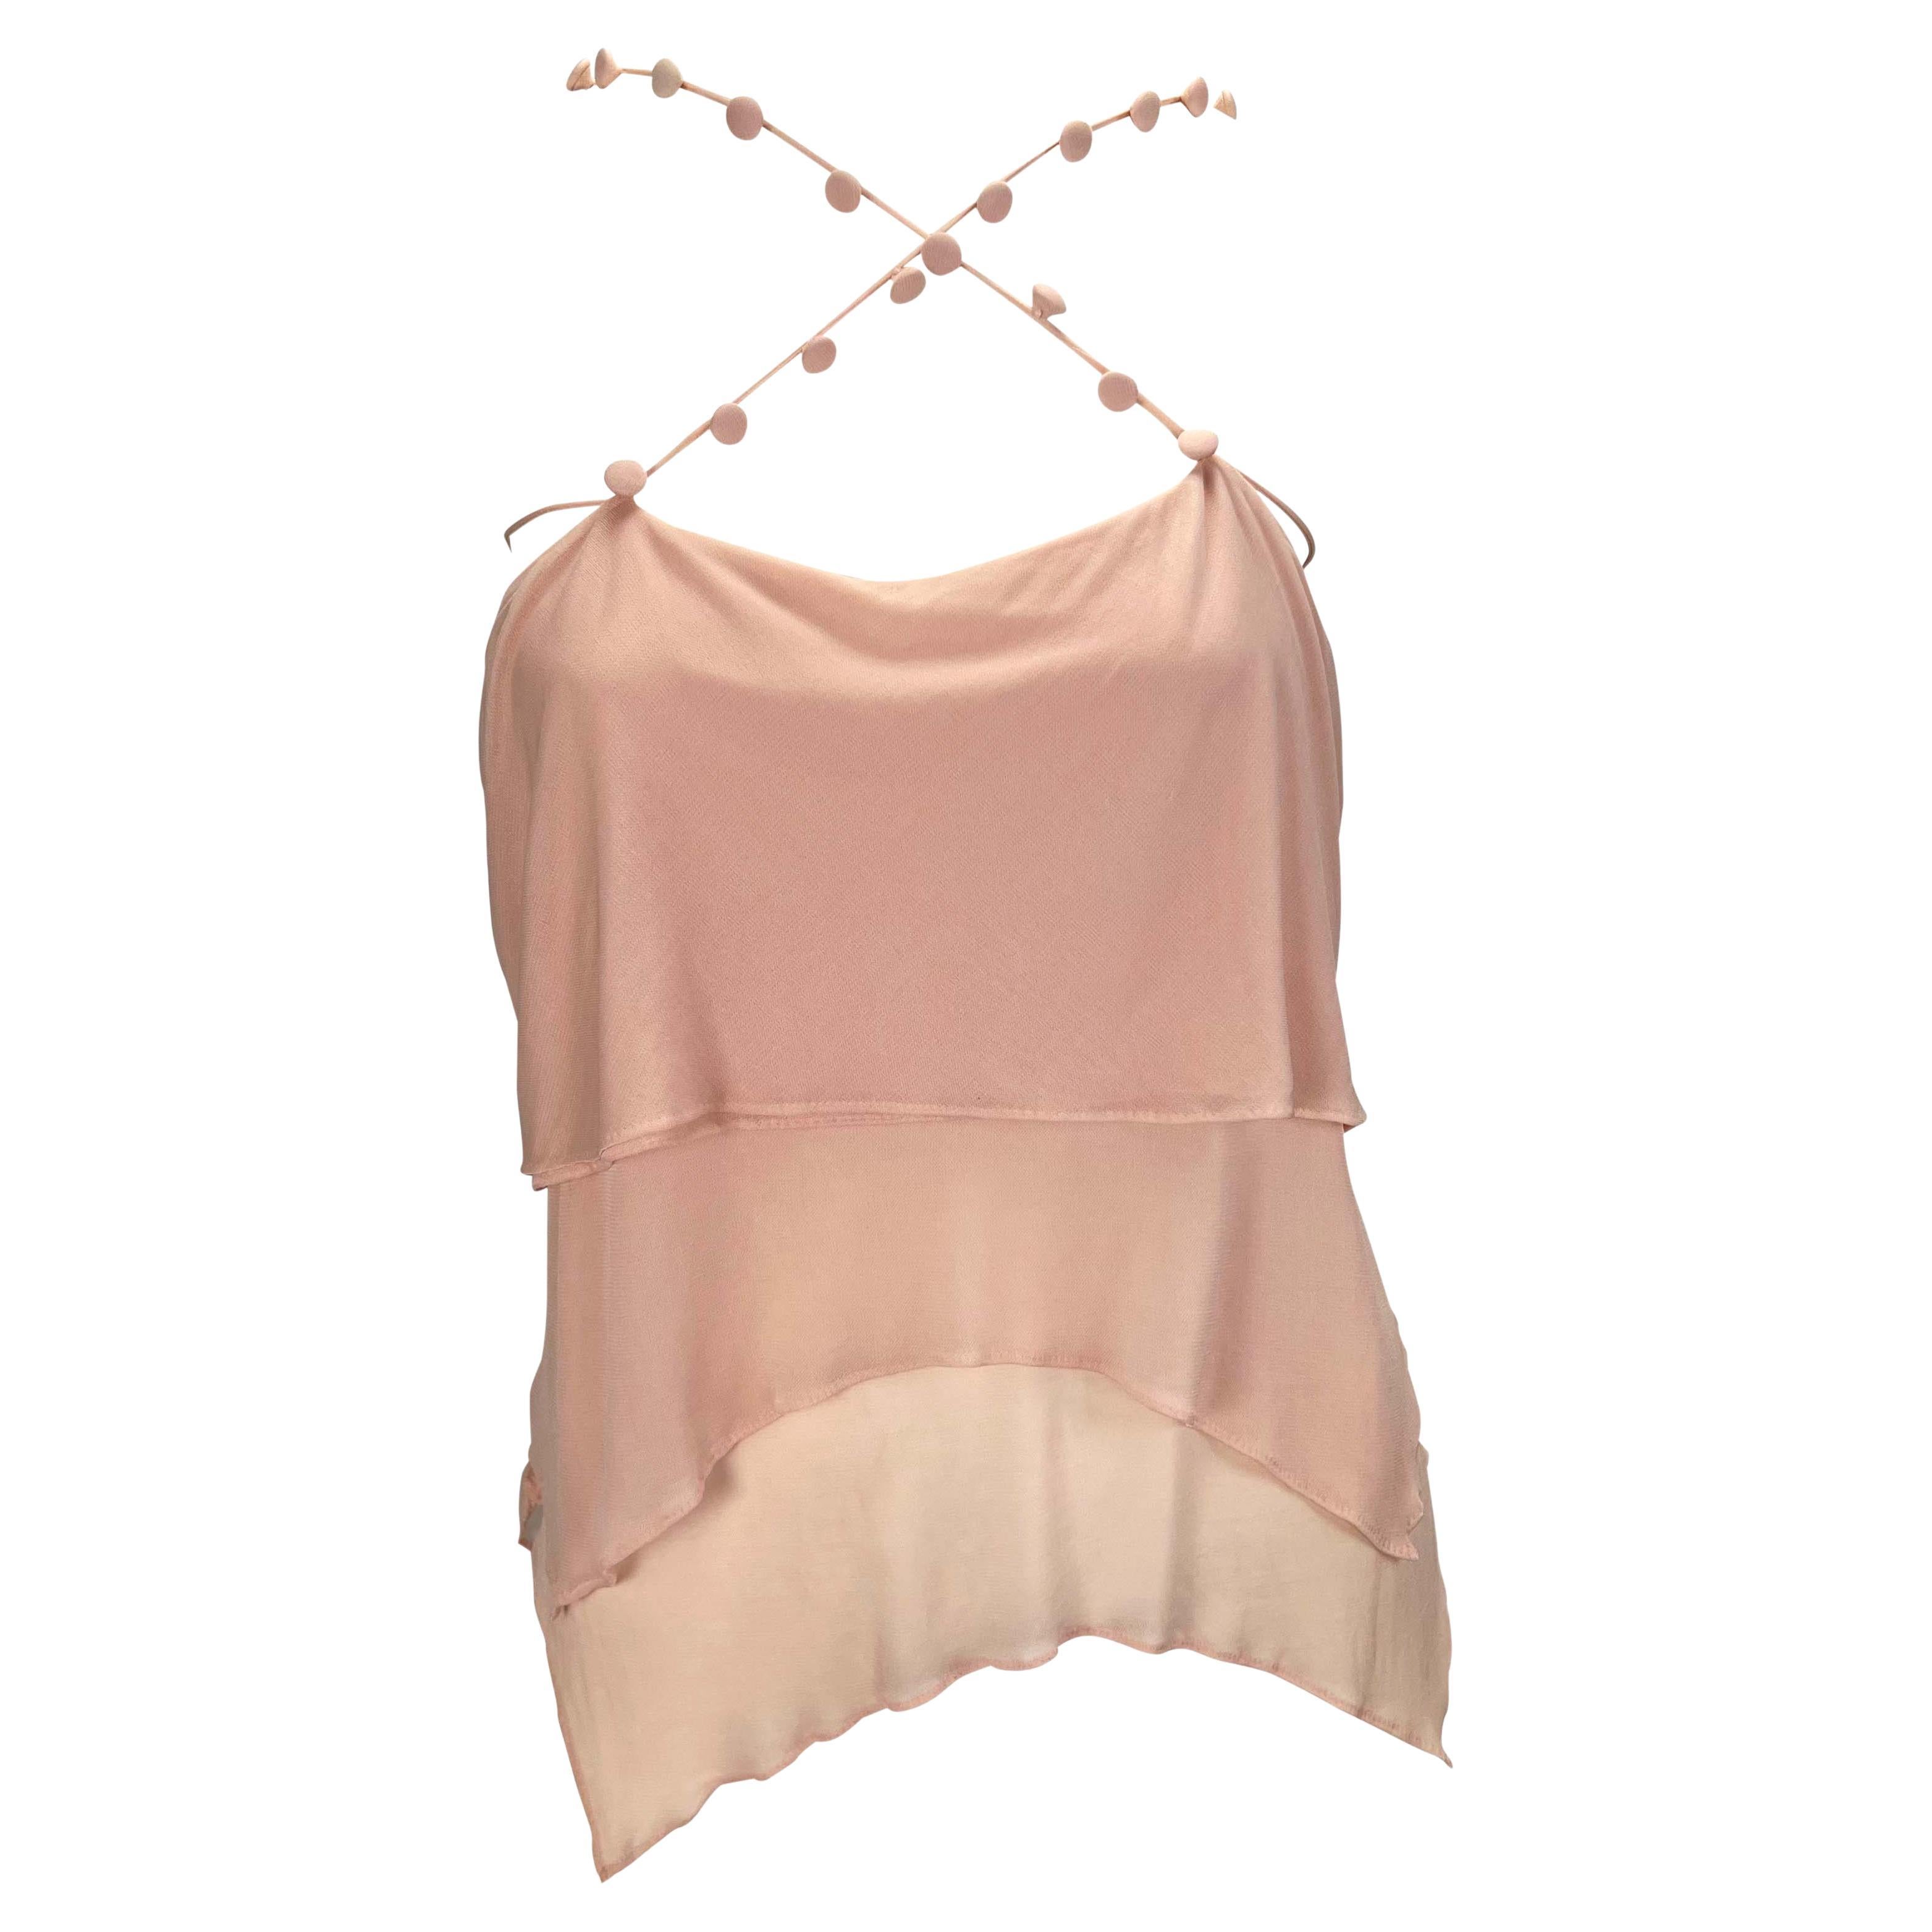 S/S 2004 Yves Saint Laurent by Tom Ford Pink Tiered Button Crop Top For Sale